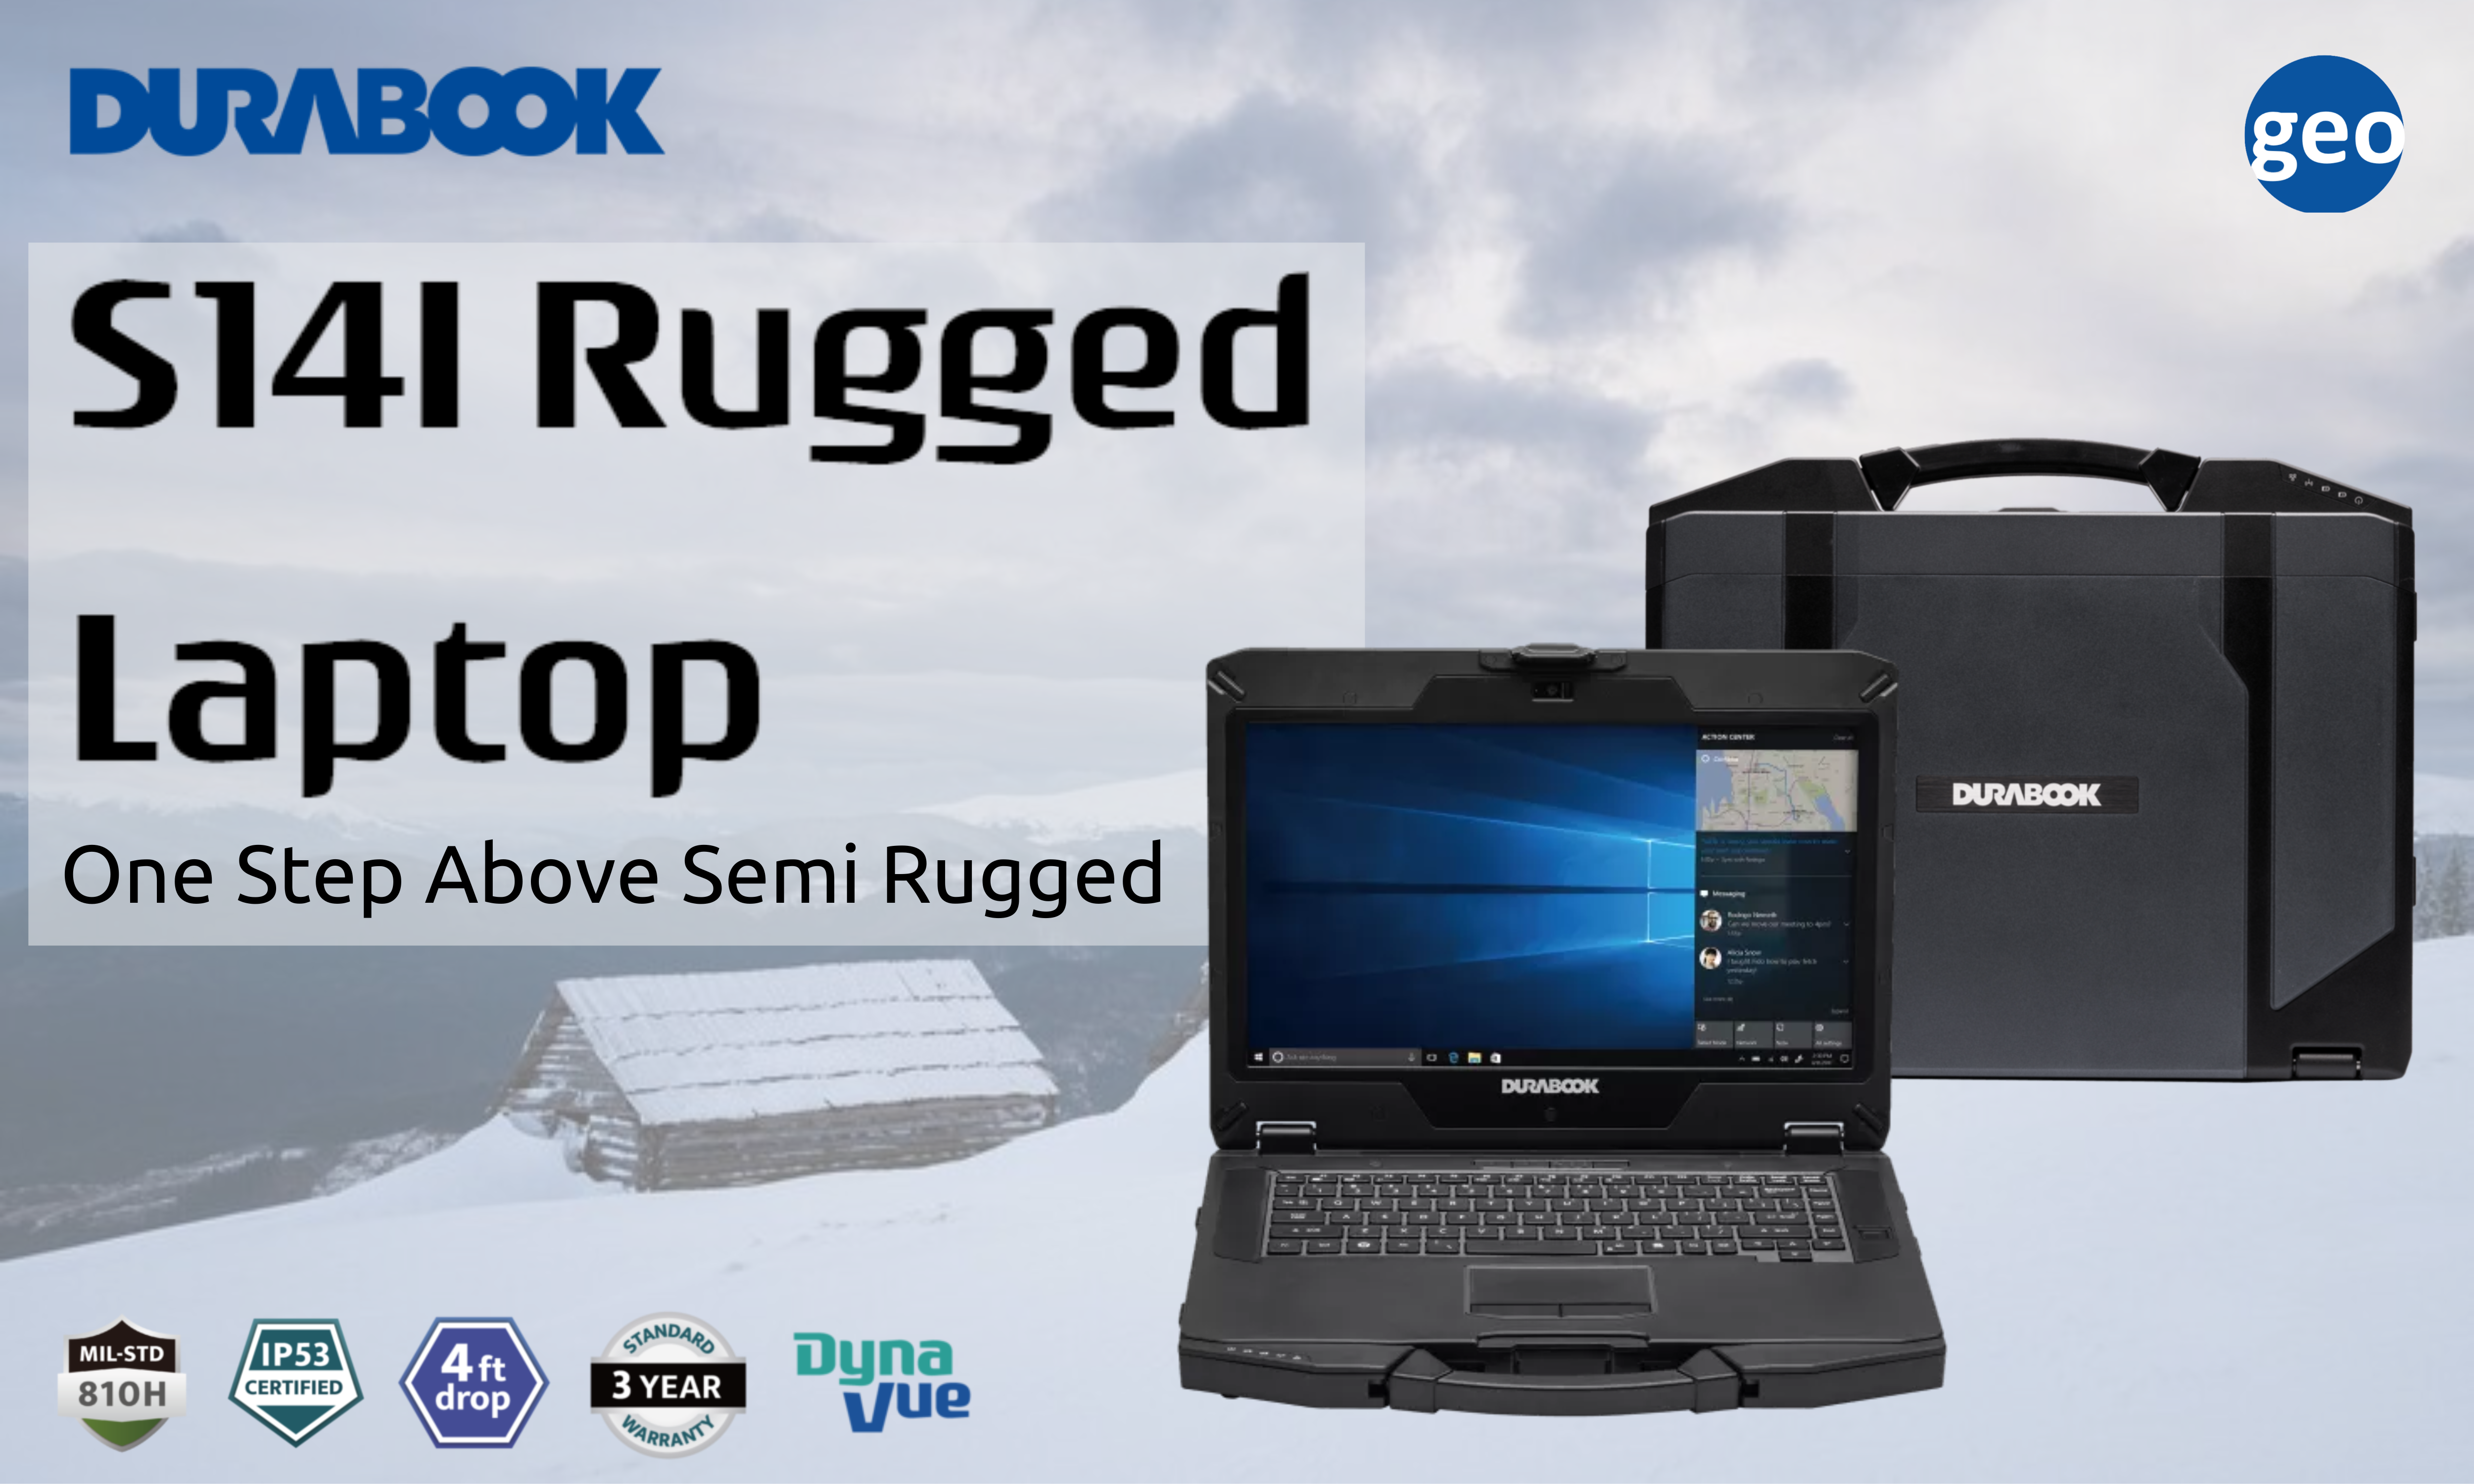 Durabook: S14I Rugged Laptop Flexibility for Workers in Today’s Challenging Working Environments